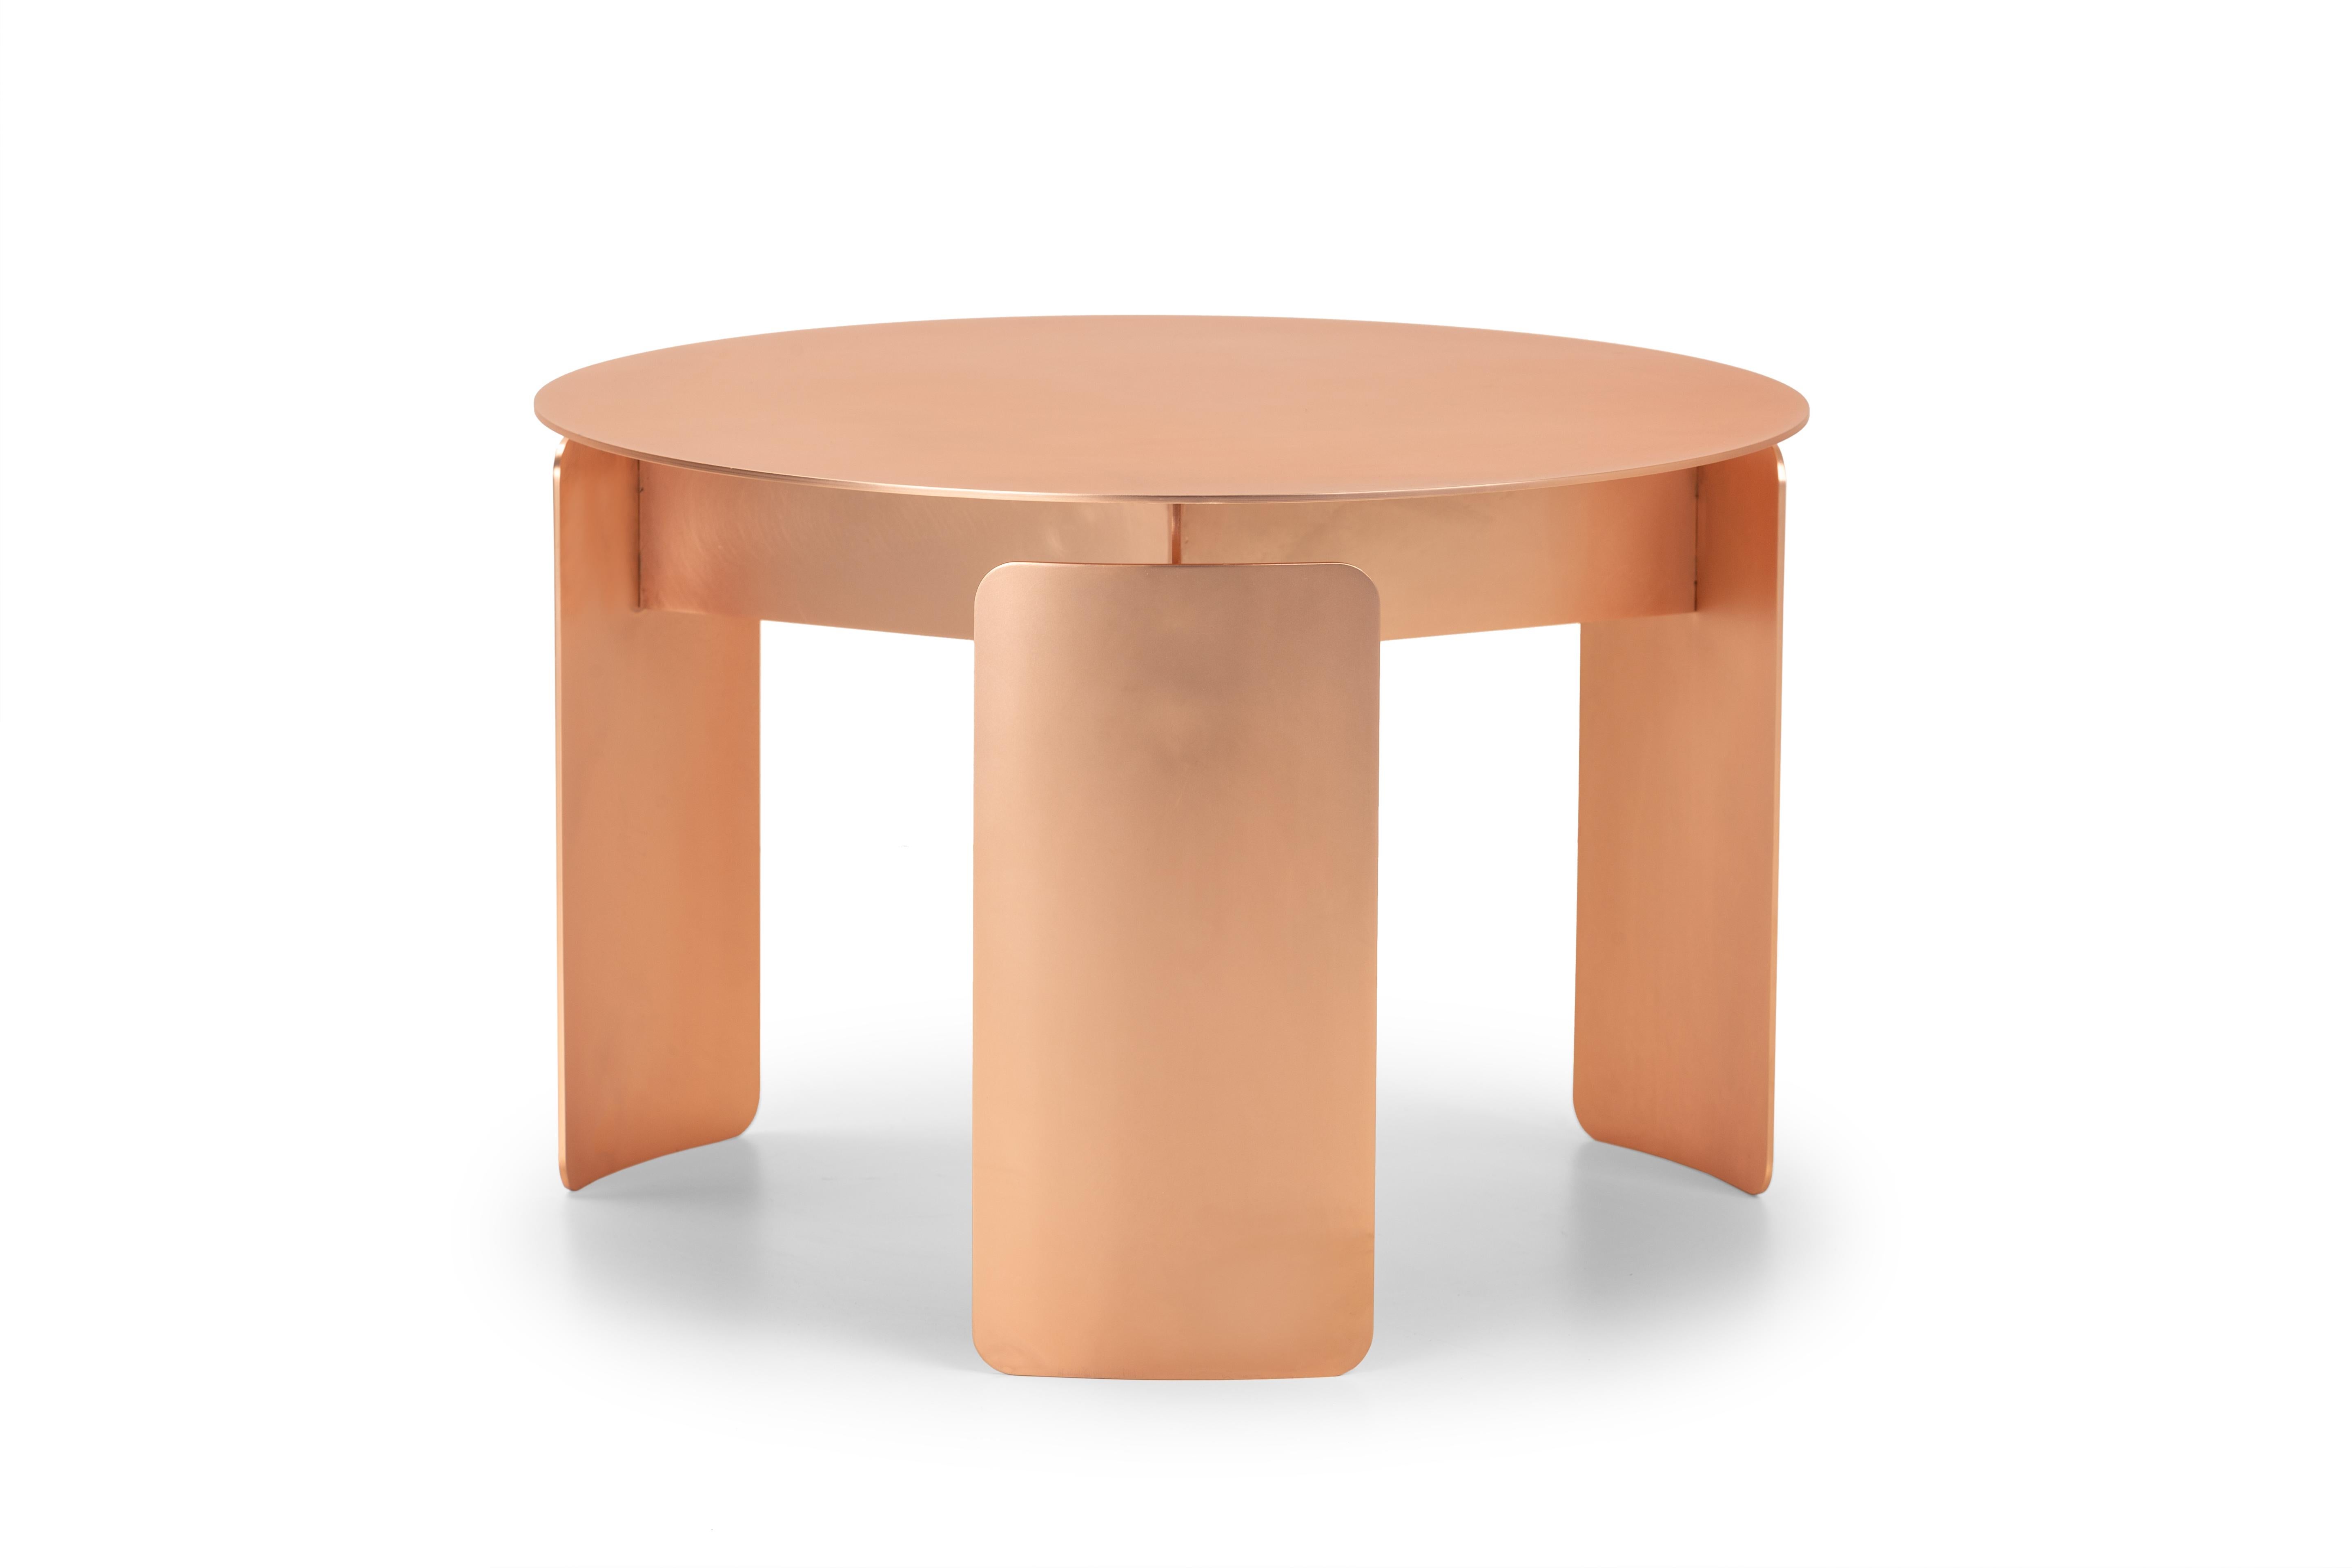 Shirudo pink gold finish side table by Mingardo
Dimensions: D60 x H40 cm.
Materials: stainless steel with pink gold finish
Weight: 30 kg

Also available in different finishes.

The name Shirudo comes from the Japanese word for shield – a